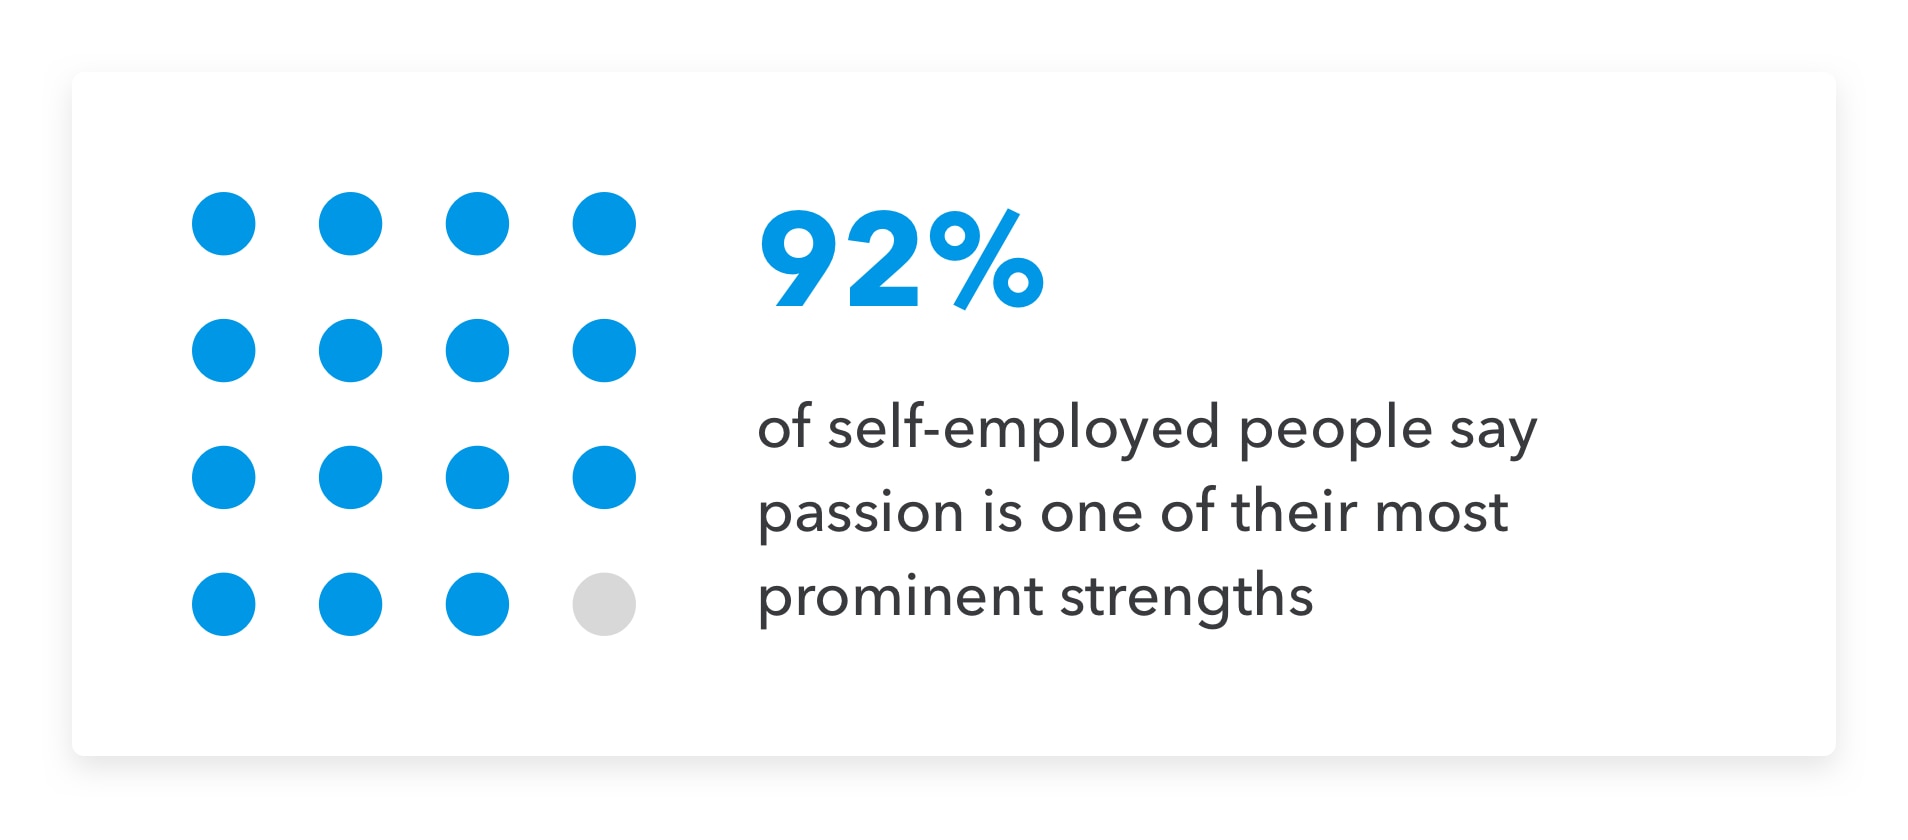 Data for self-employment.